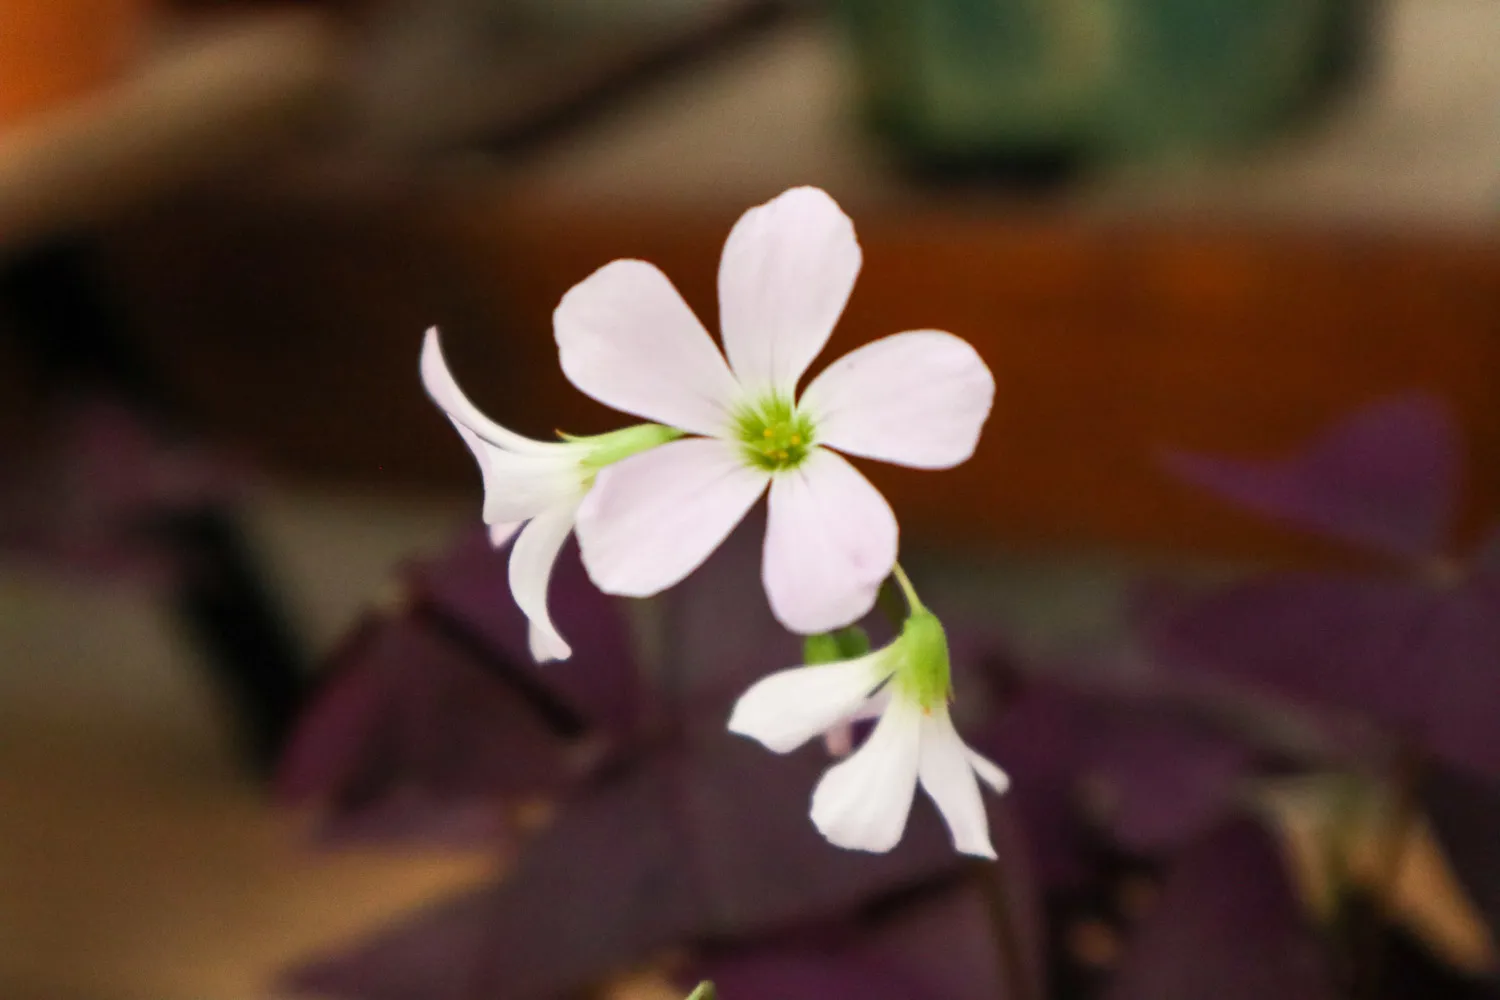 Purple Shamrock Plant (Oxalis Violacea) Care And Growing Guide